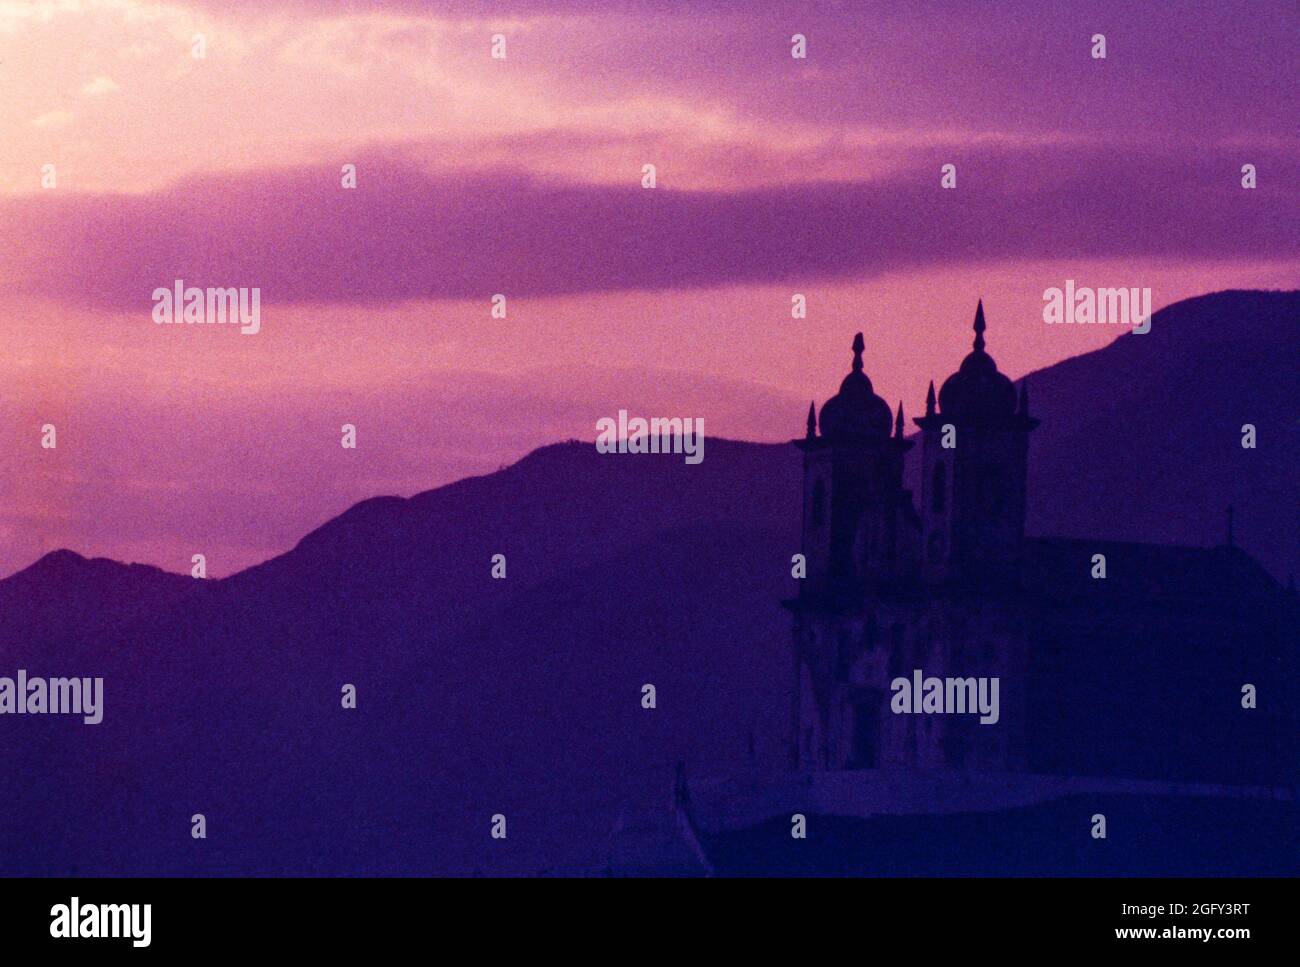 Silhouette of catholic church at twilight - Ouro Preto is a former colonial mining town located in the Serra do Espinhaço mountains and designated a World Heritage site by UNESCO because of its outstanding Baroque Portuguese colonial architecture. Stock Photo